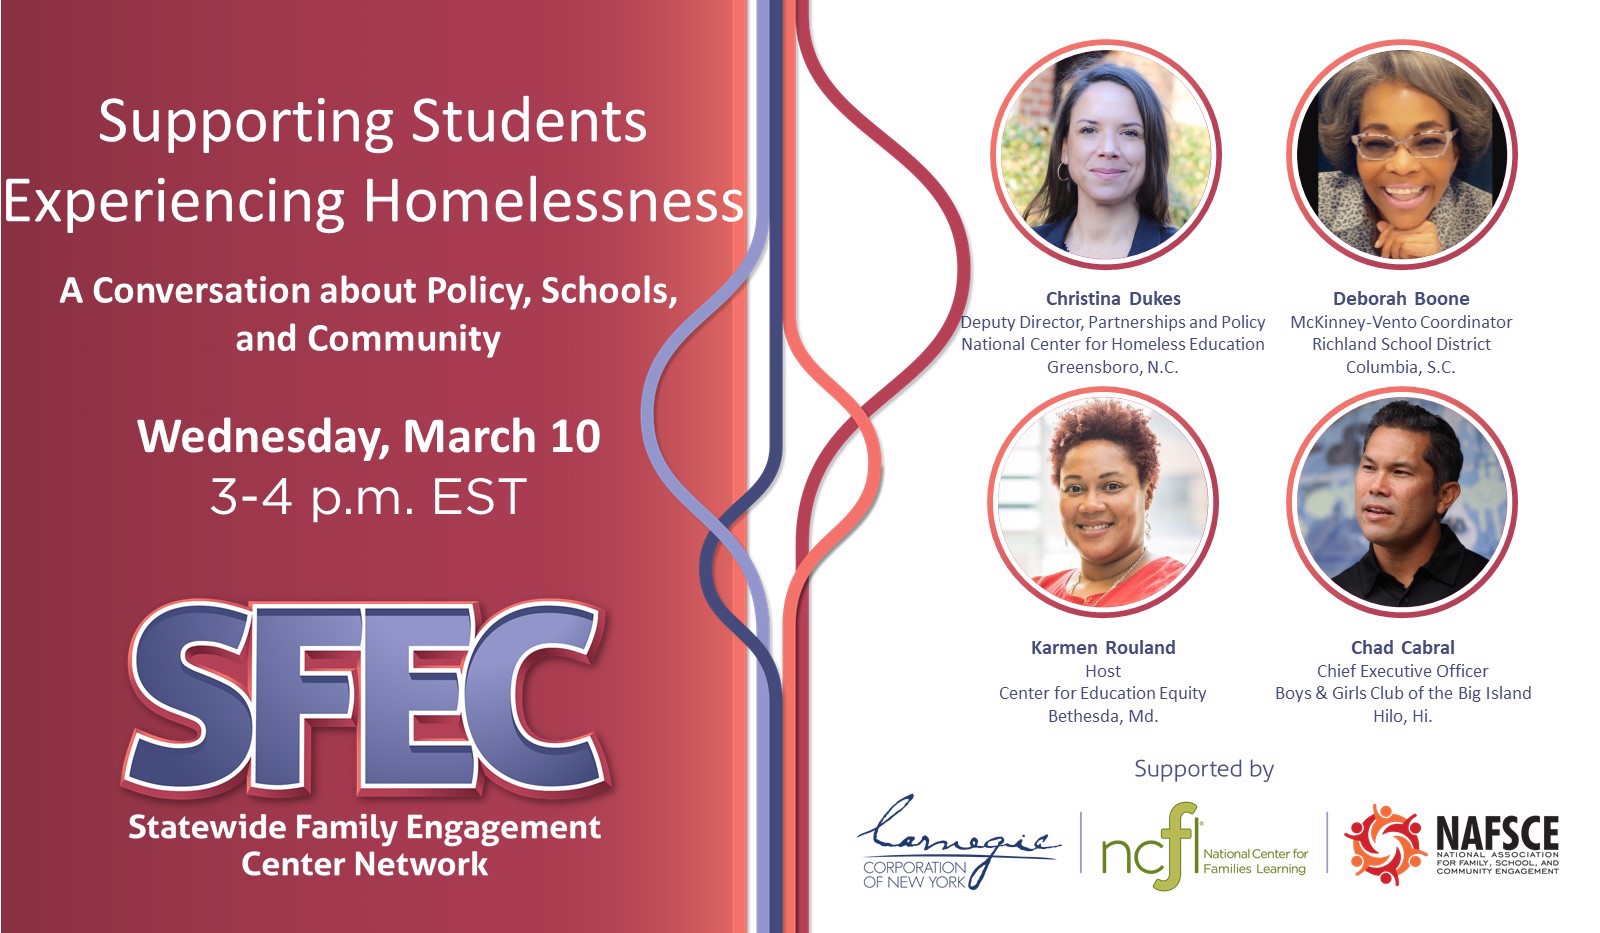 Supporting Students Experiencing Homelessness webinar image with photos of presenters